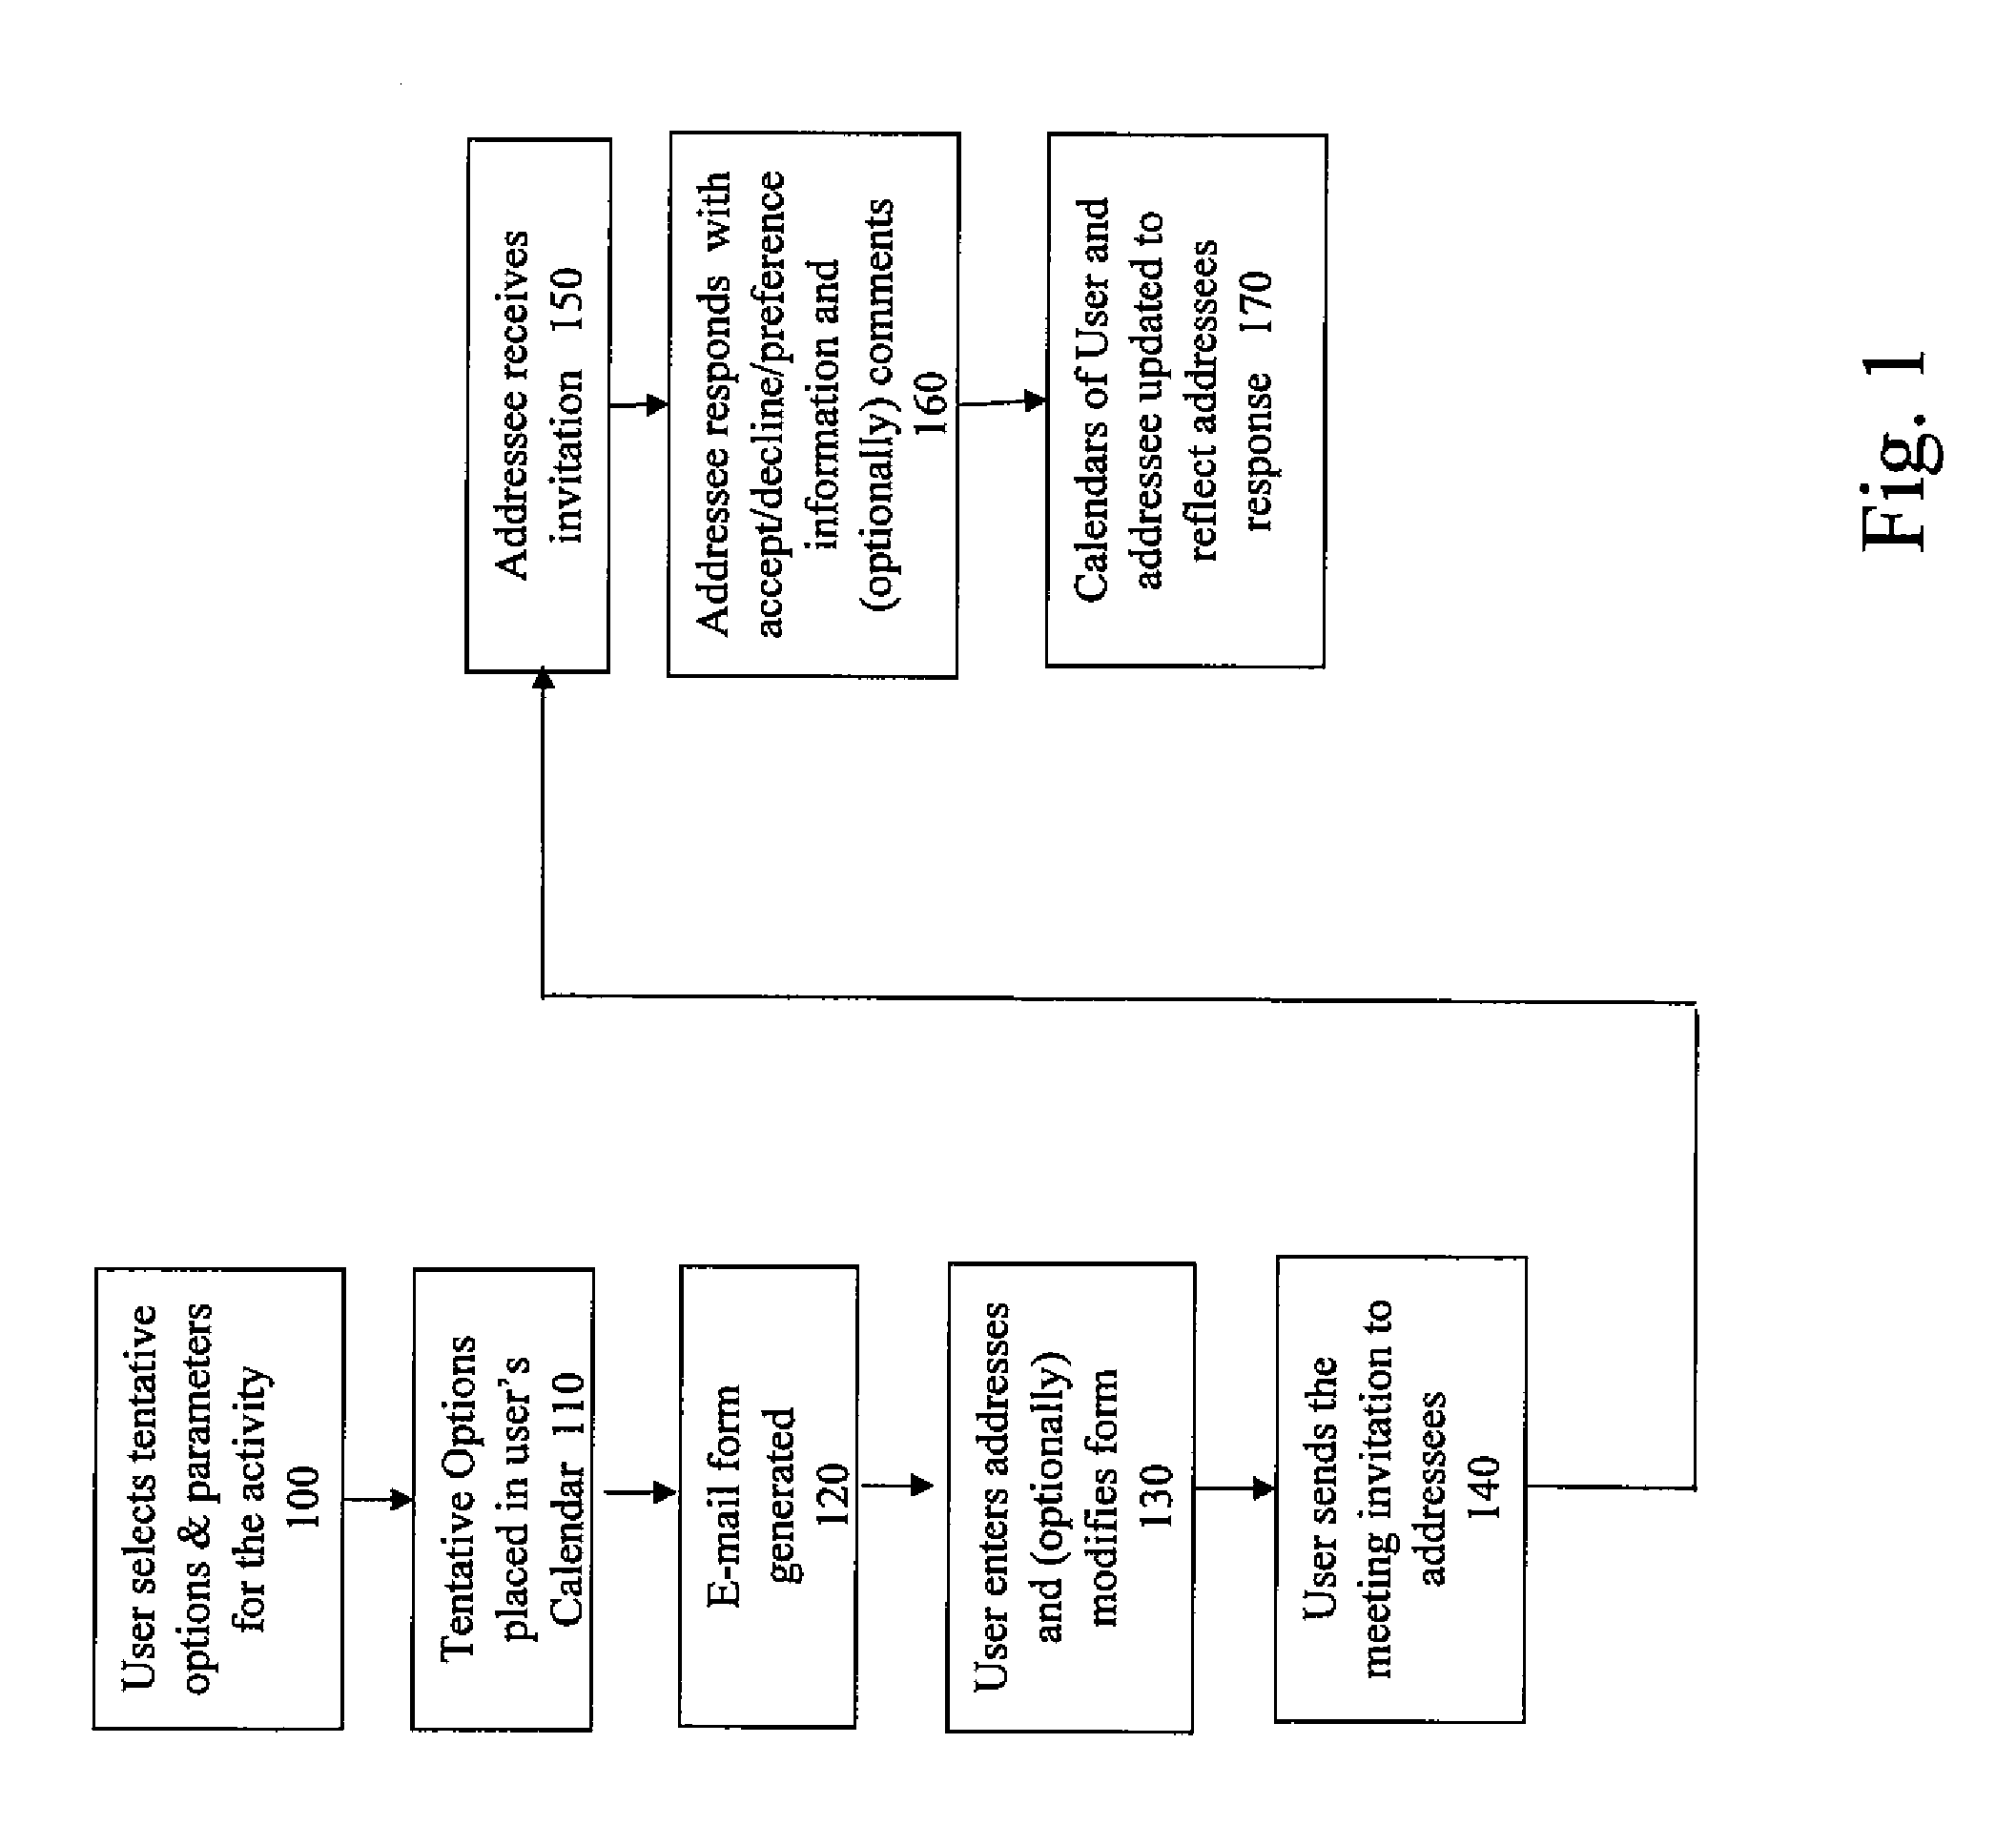 Method and user interface for computer-assisted schedule coordination